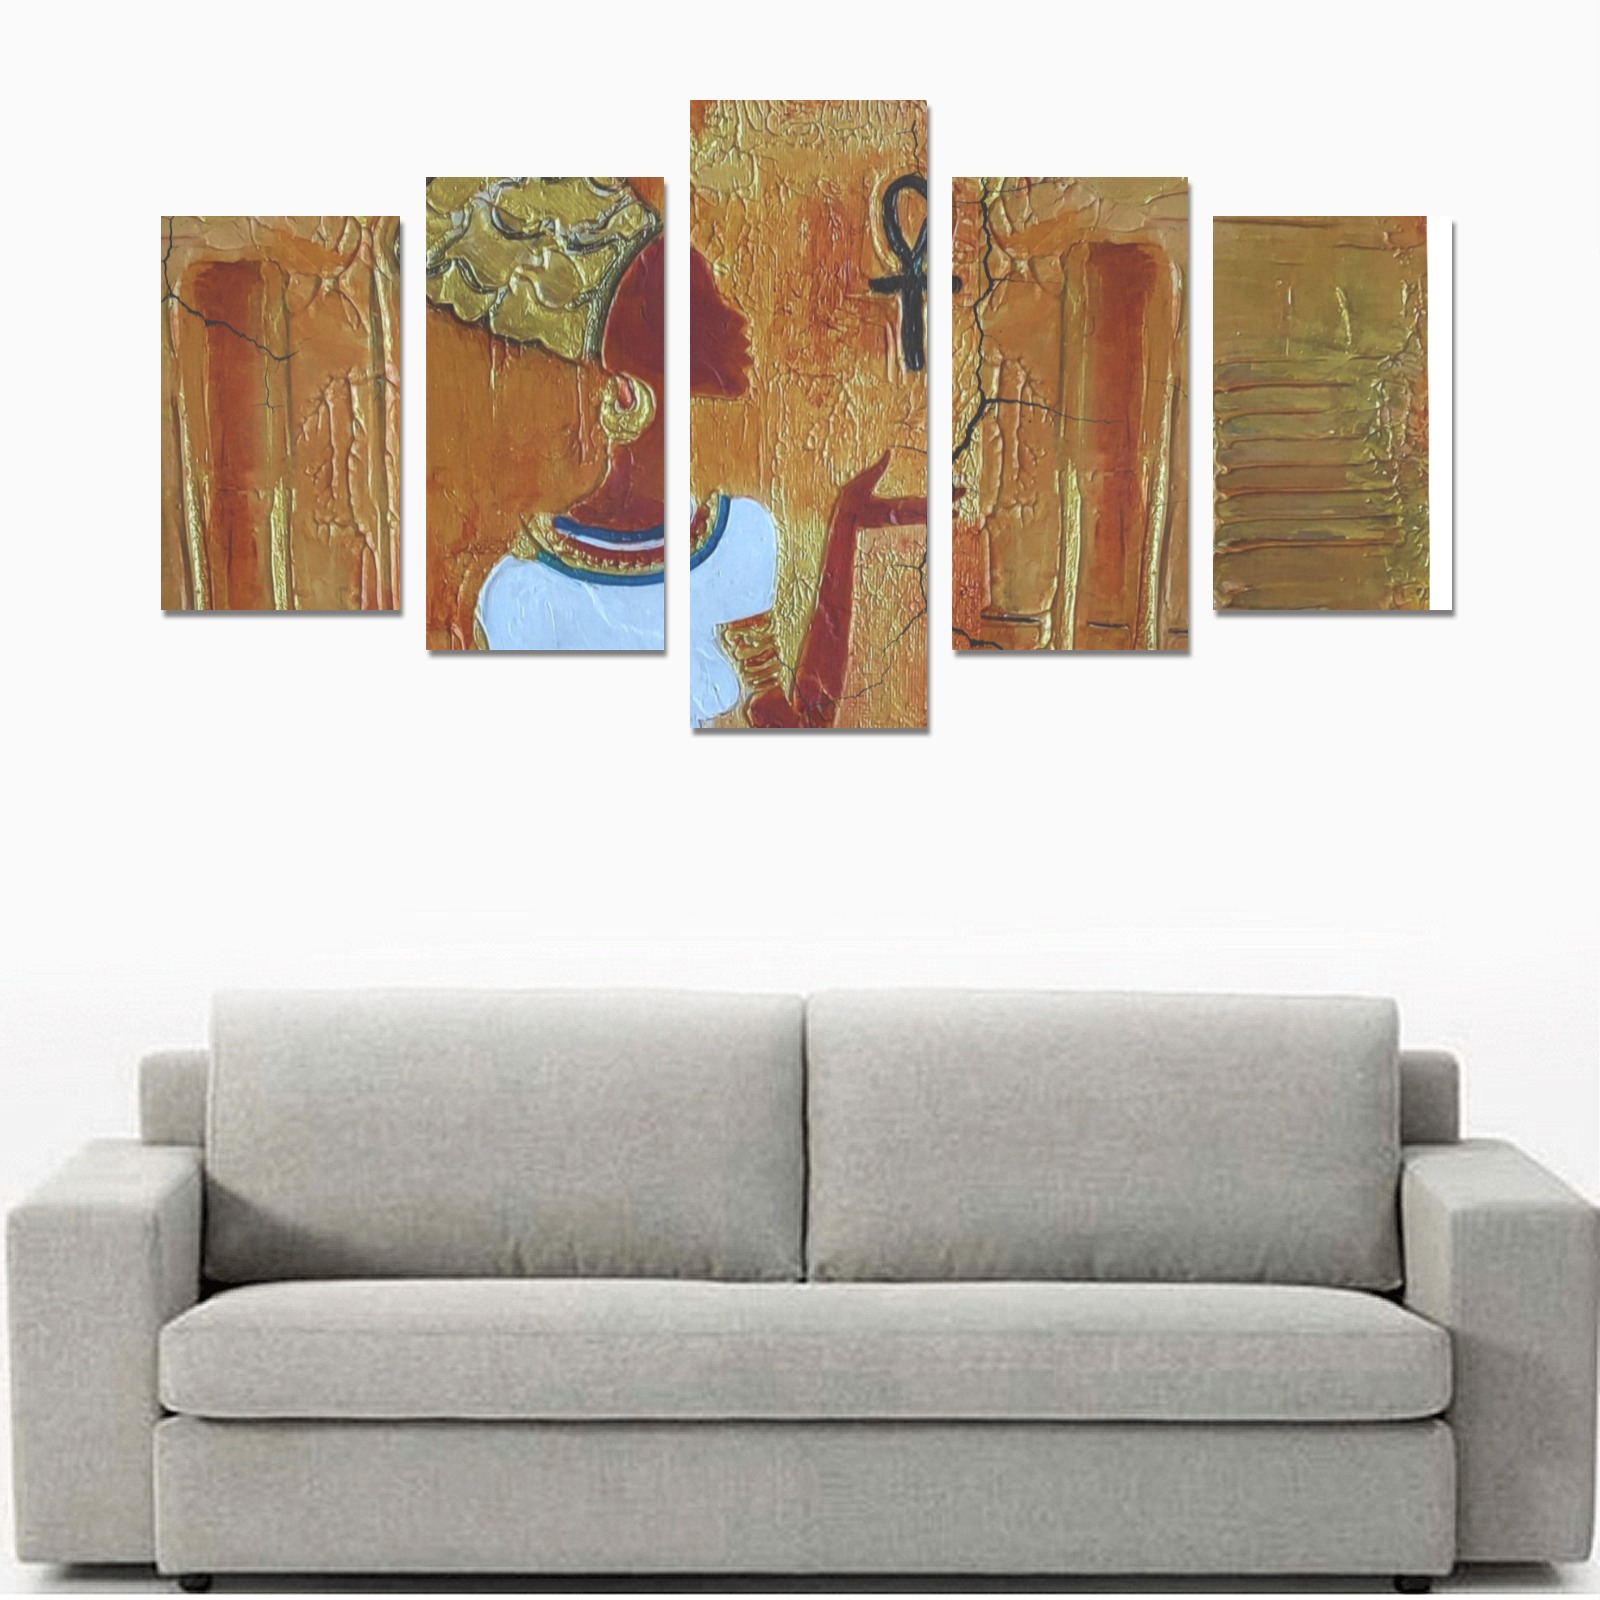 Queen of life Canvas Print Sets C (No Frame)